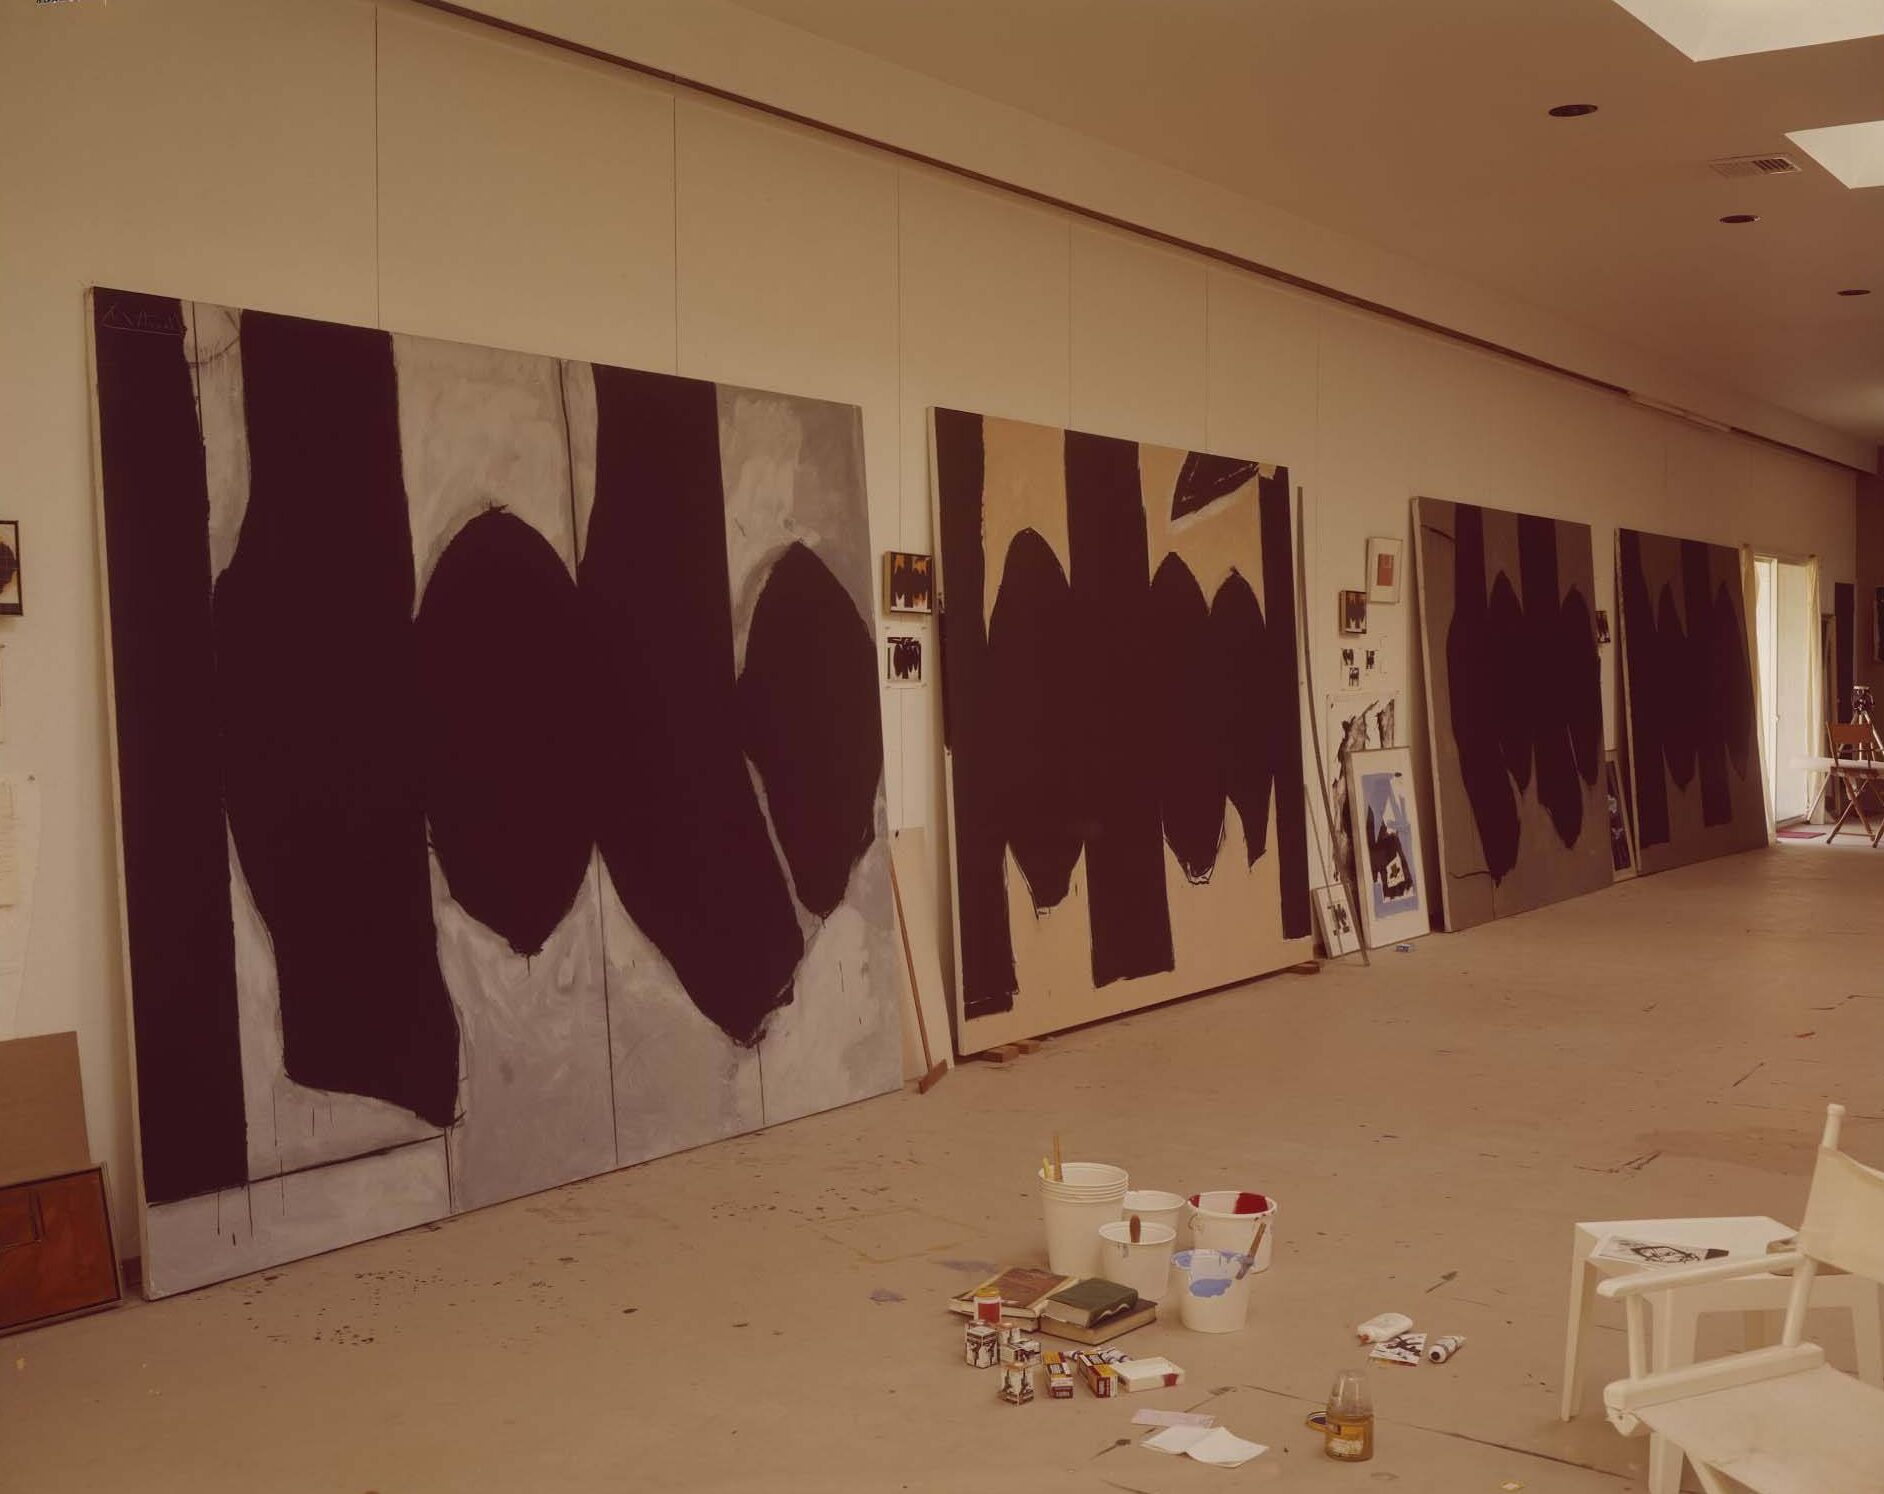 Motherwell’s Greenwich painting studio with Elegy to the Spanish Republic No. 128 and others in progress, 1975